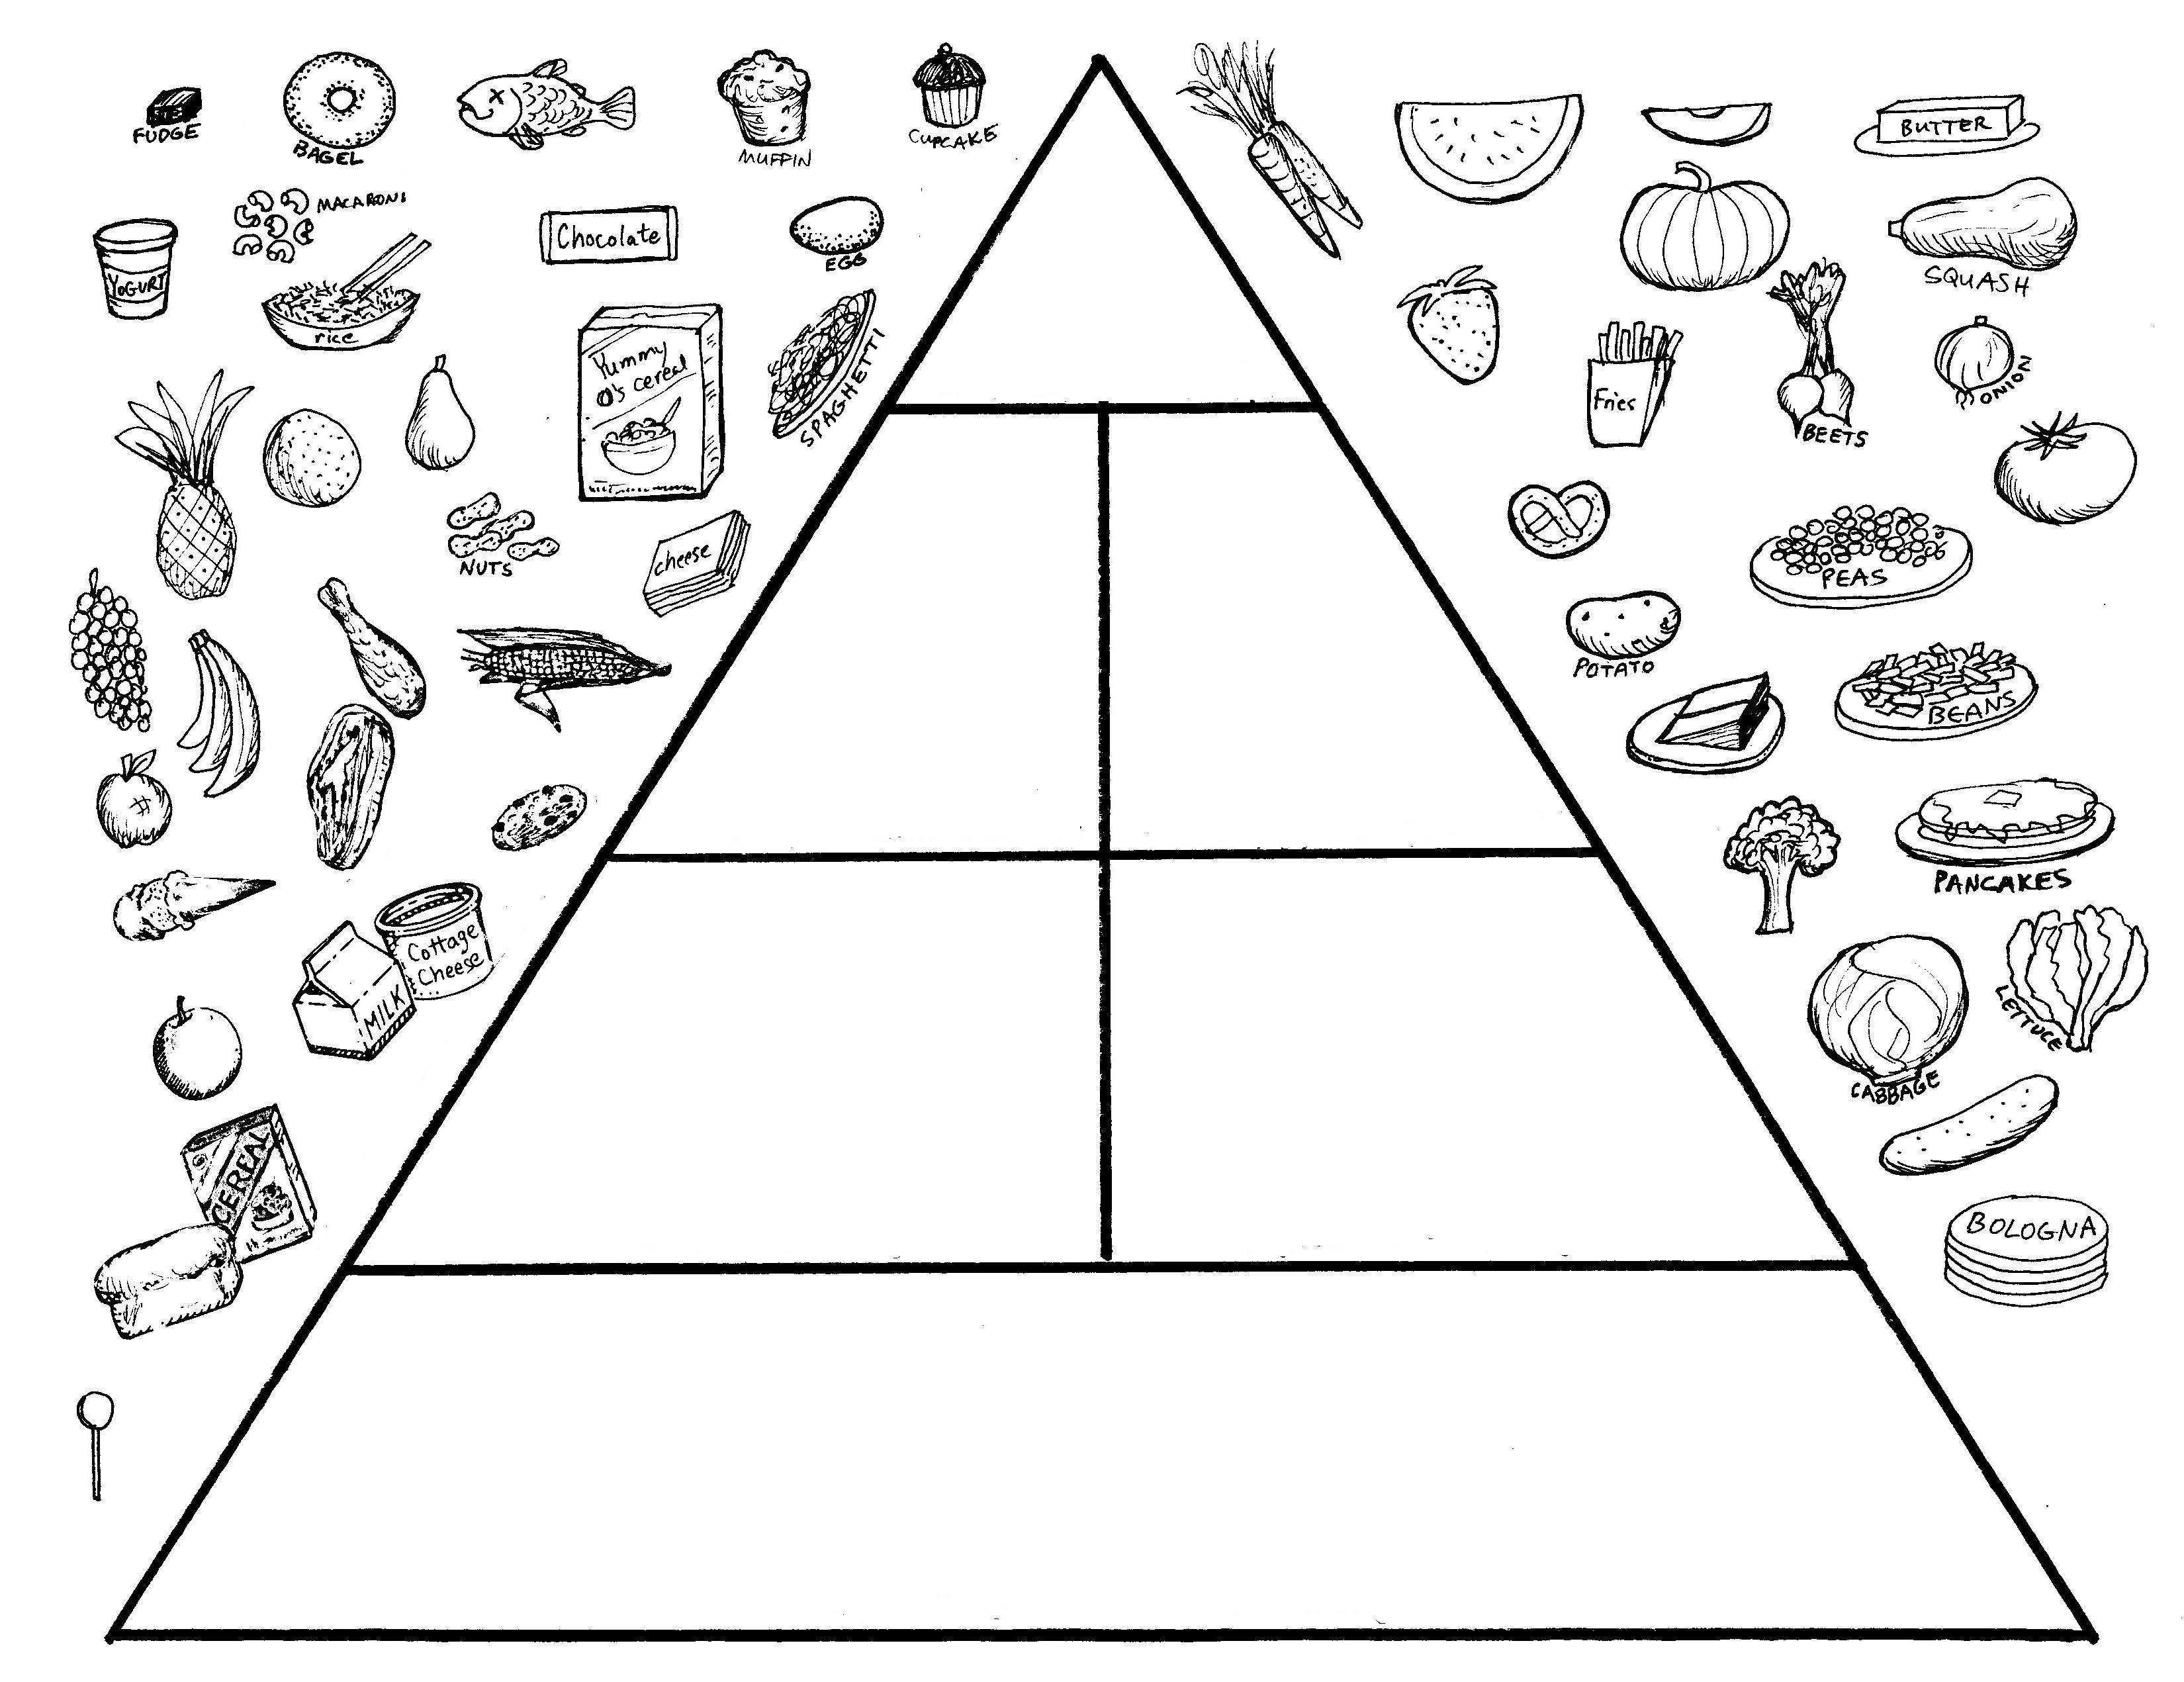 Food Pyramid Coloring Sheets For Kids
 Almost Unschoolers Cloudy With A Chance of Meatballs